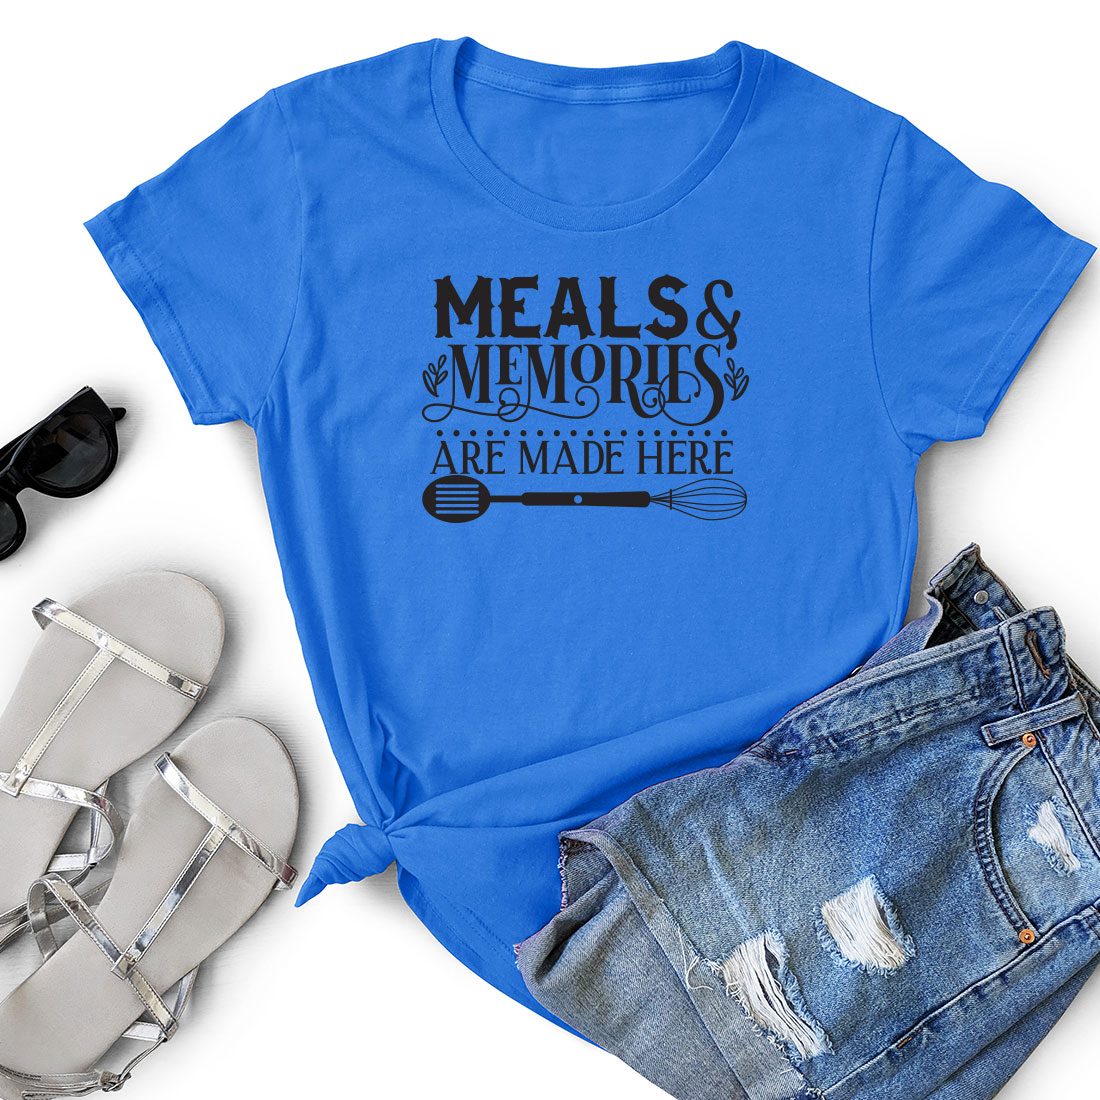 T - shirt that says meals and memories are made here.